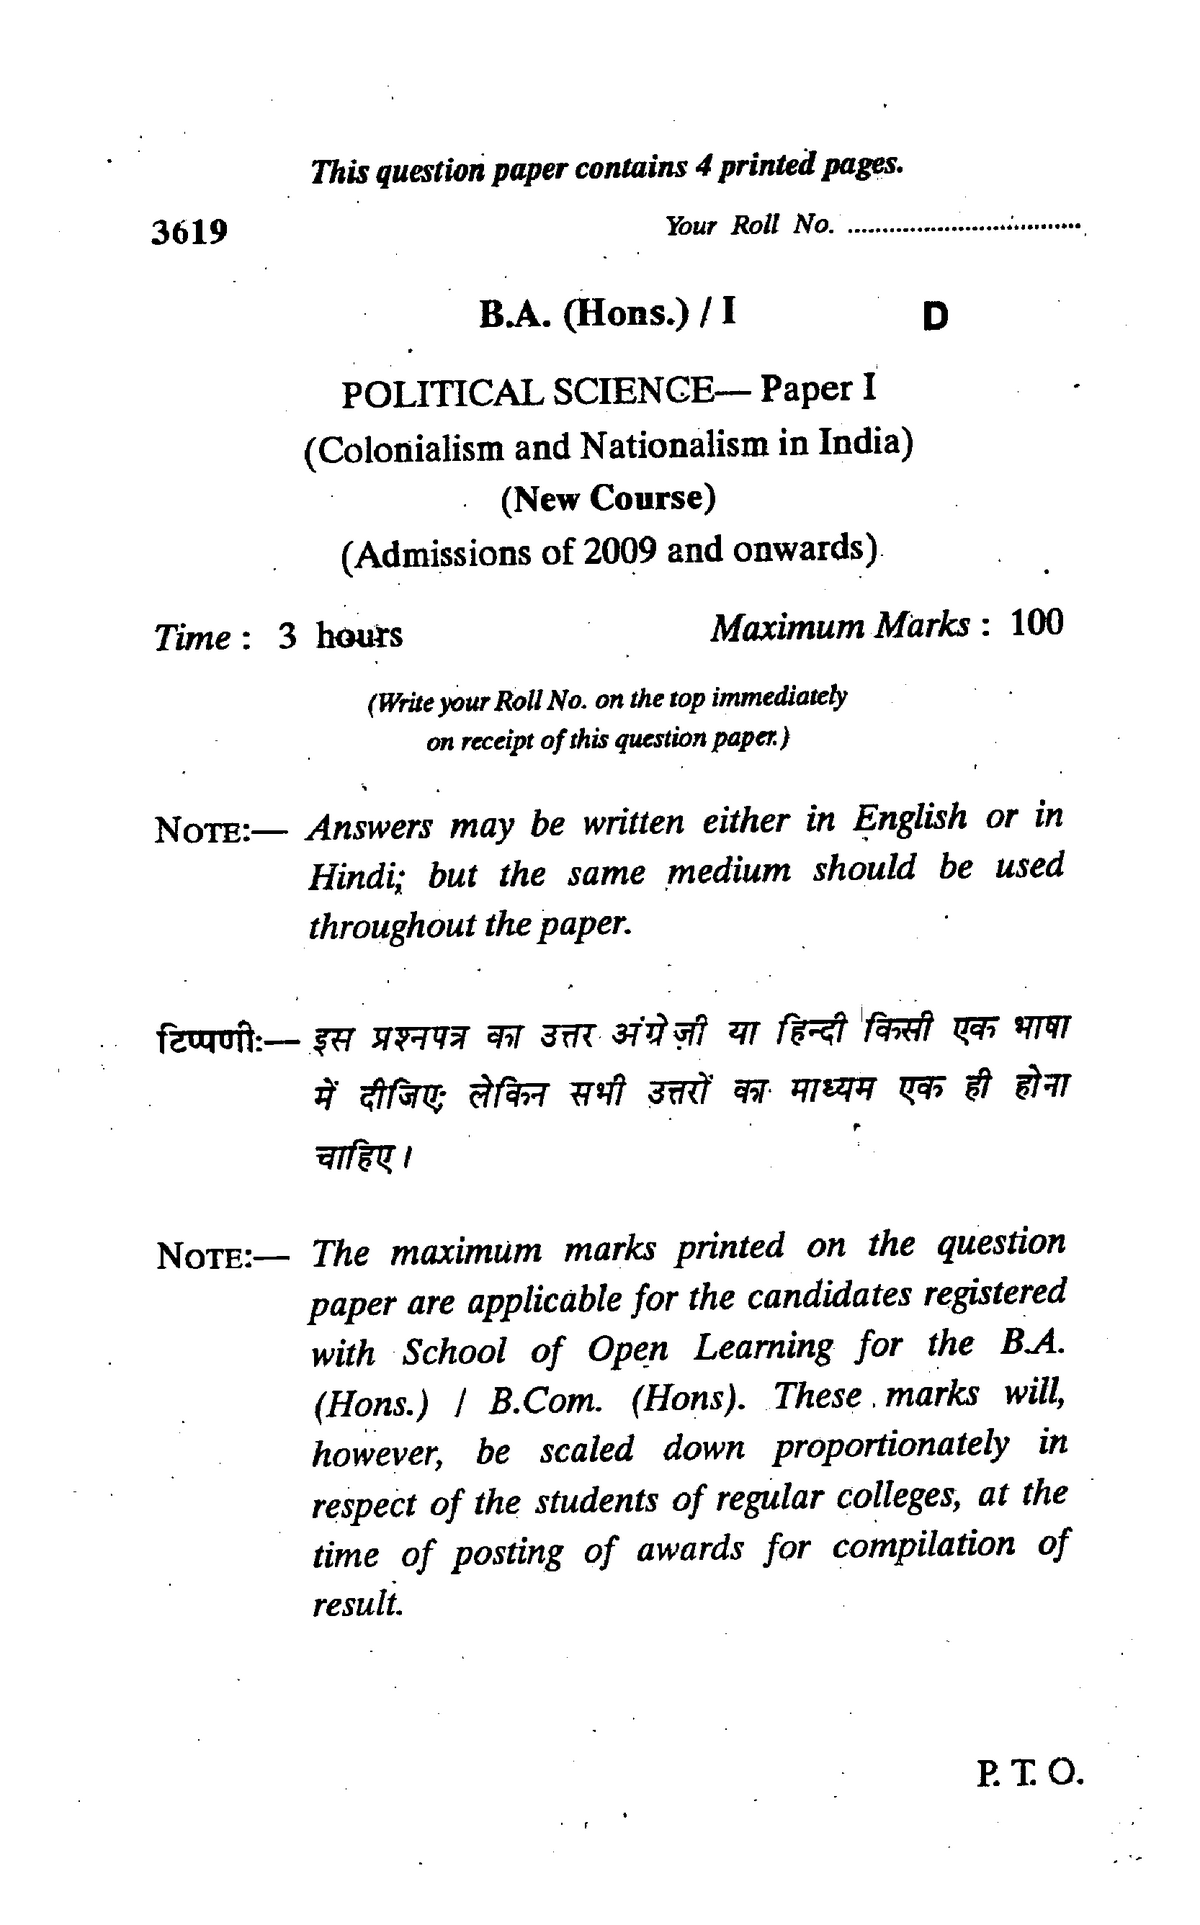 political science research paper india